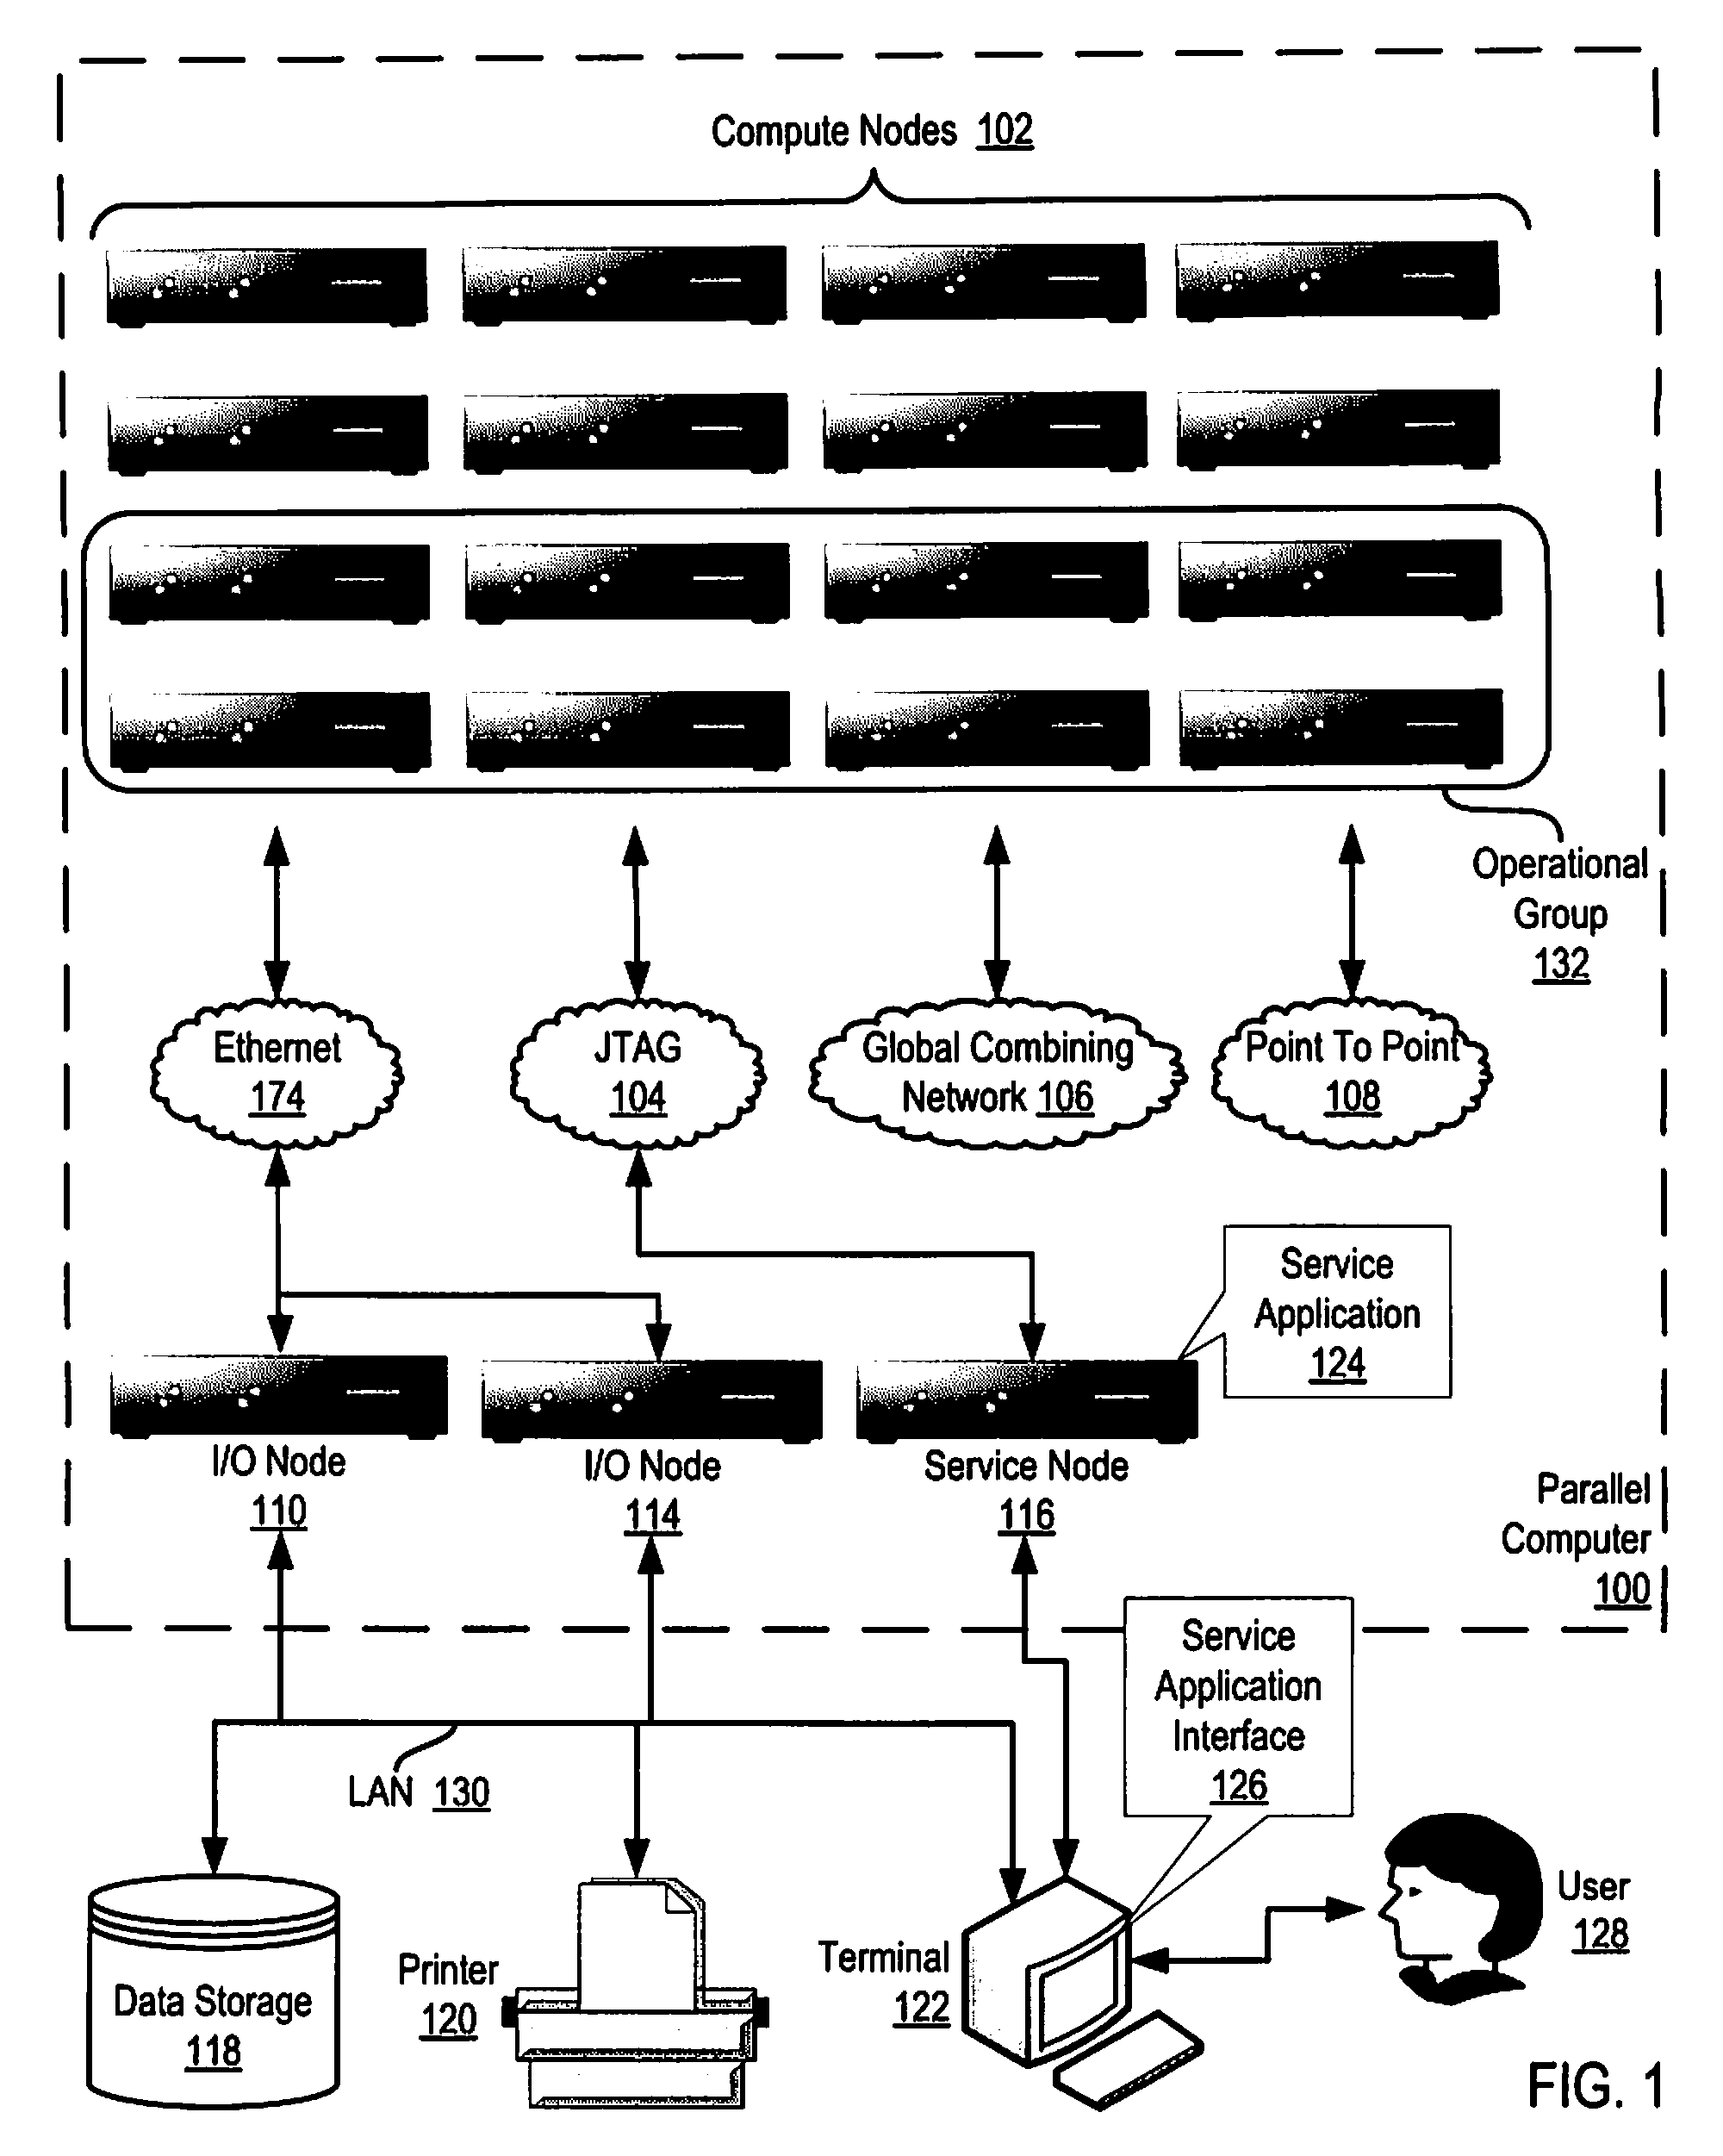 Executing an Allgather Operation on a Parallel Computer